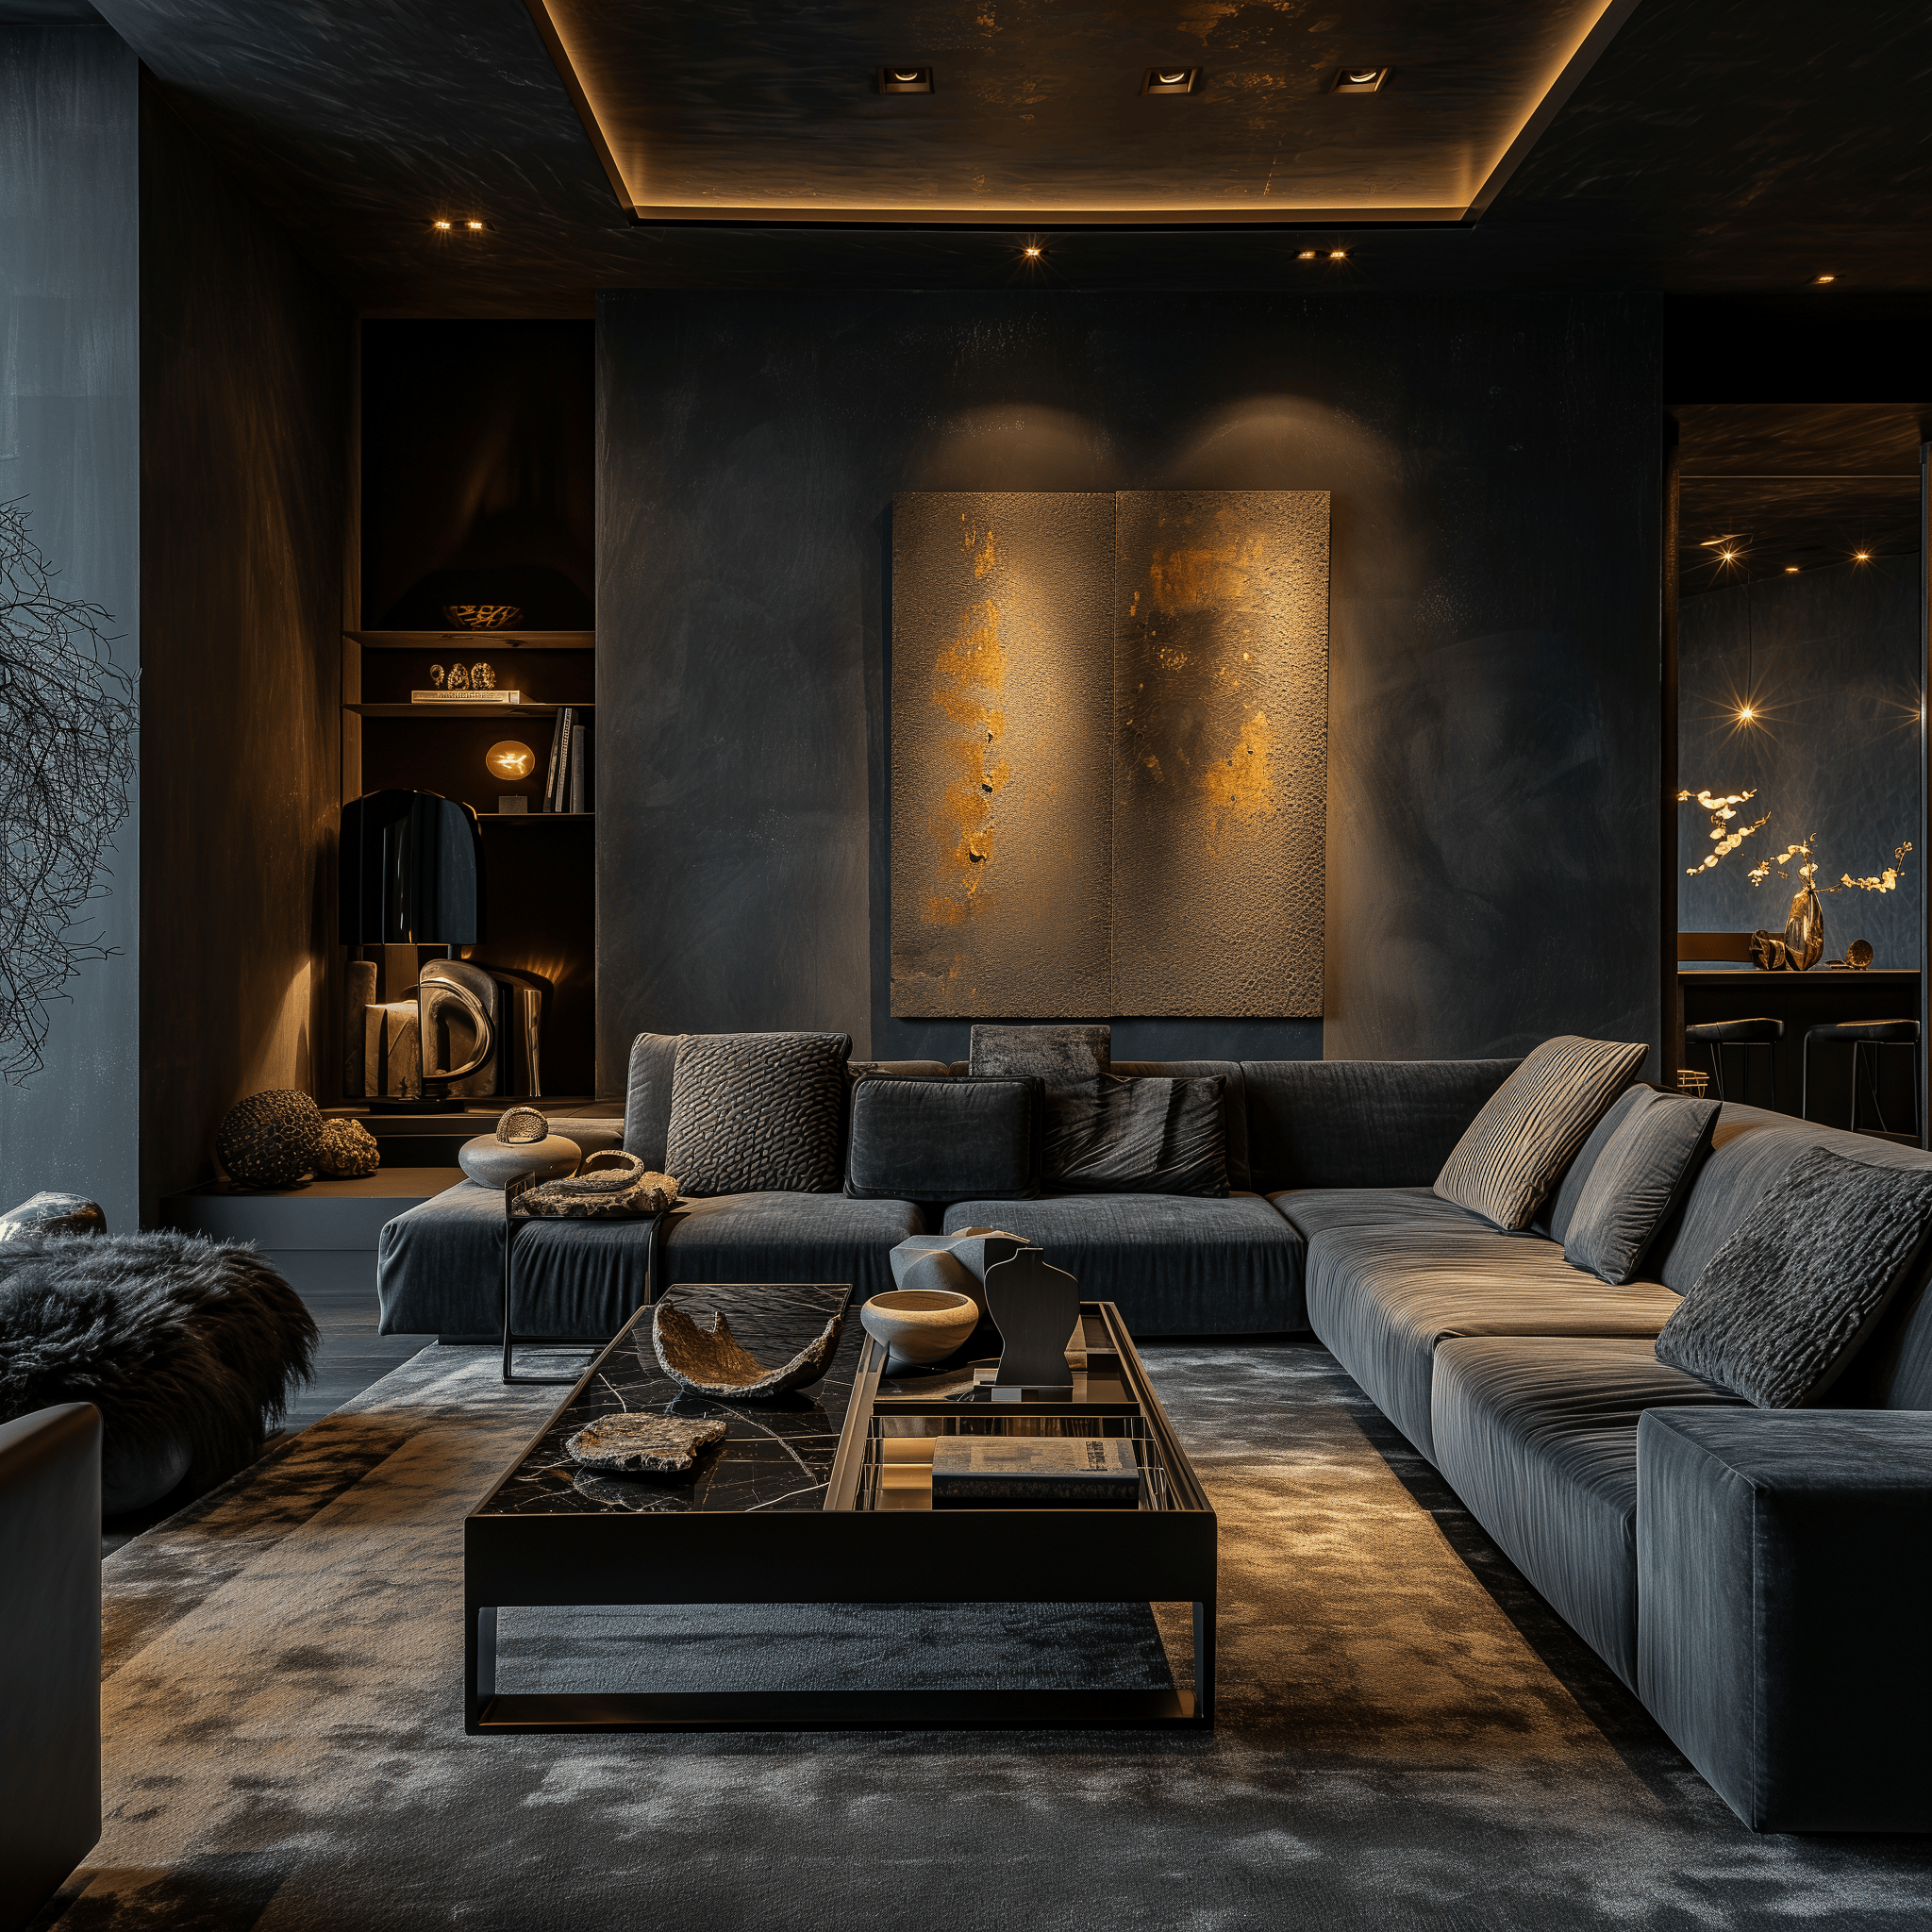 Eye-level real estate photograph of an elegant, dark living room, featuring cozy textiles and luxurious architectural details.